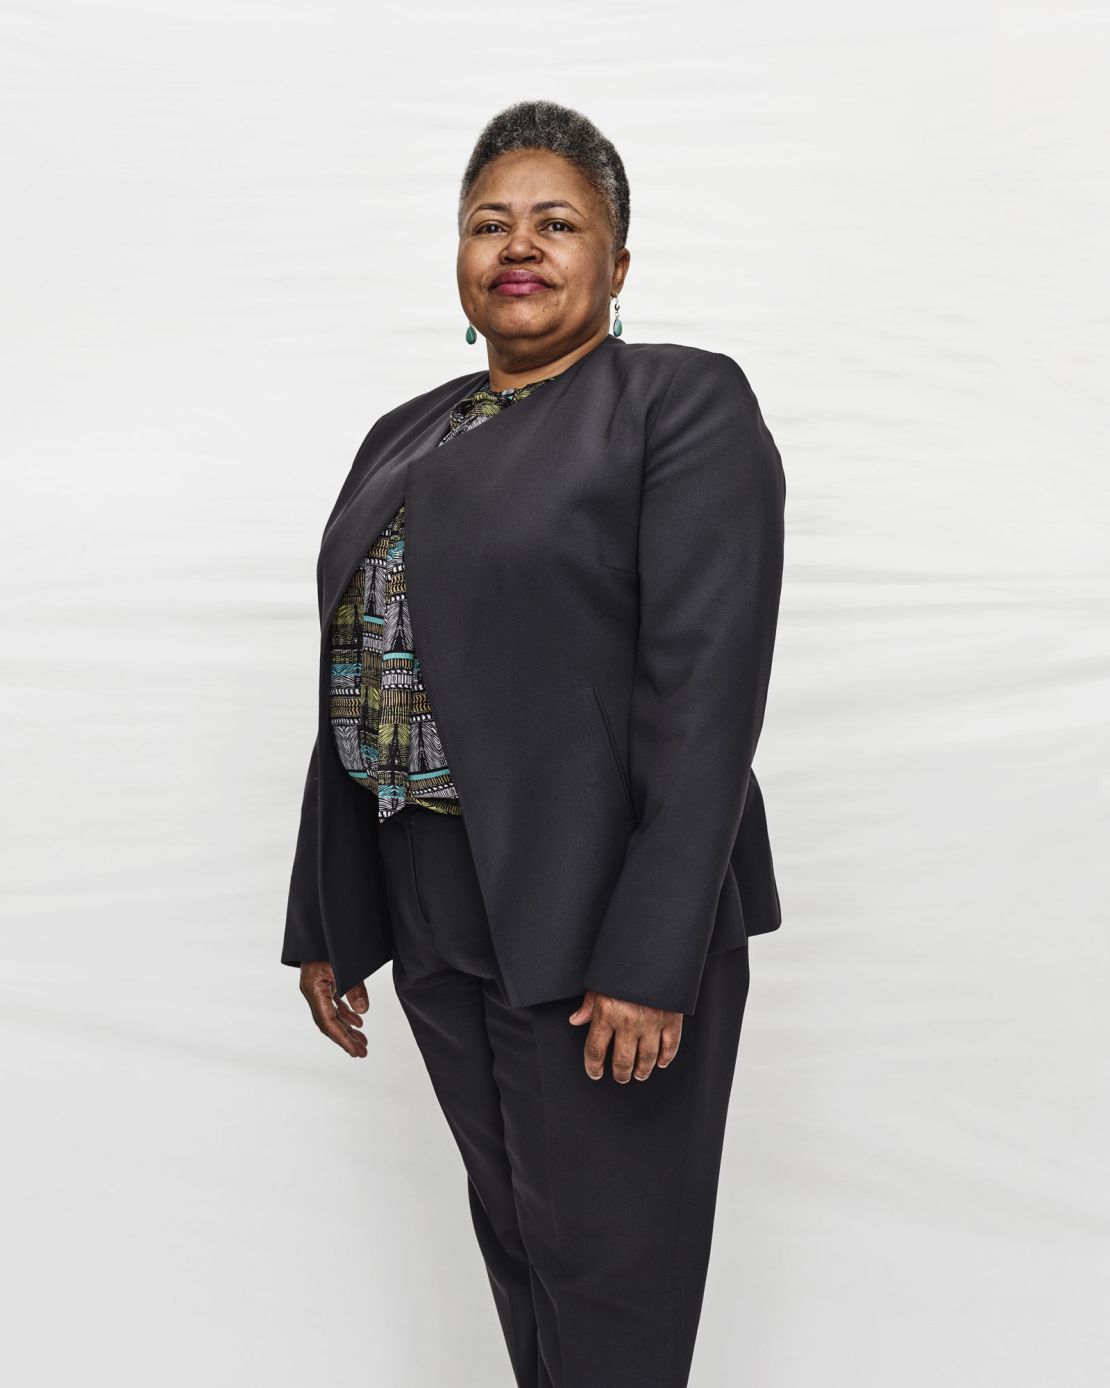 Monica Lewis-Patrick, also known as "The Water Warrior," is president  of "We, The People of Detroit" a civic group fighting for clean, affordable water.